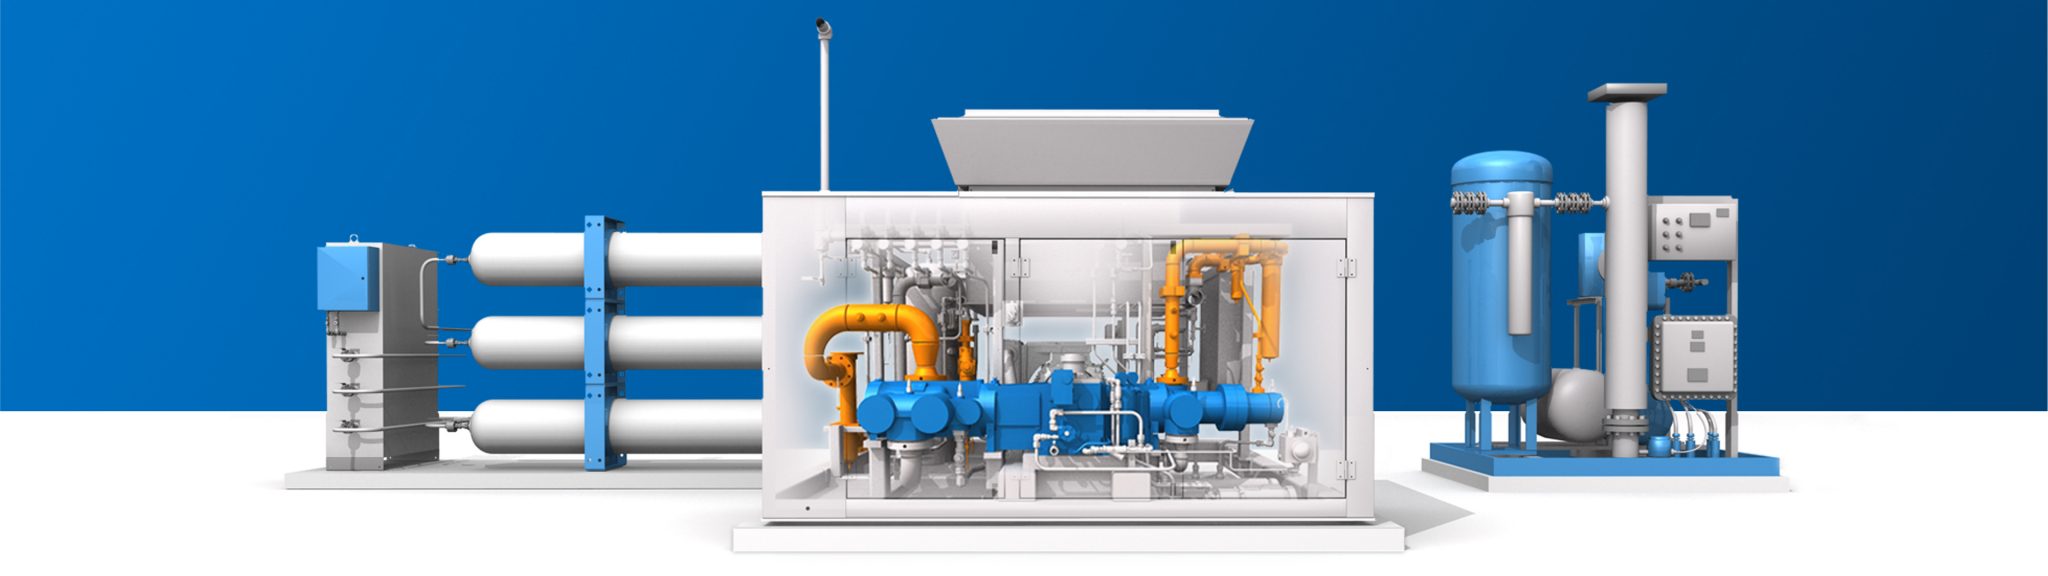 A rendering of a CNG Station, translucent to reveal an Ariel CNG Compressor within the station